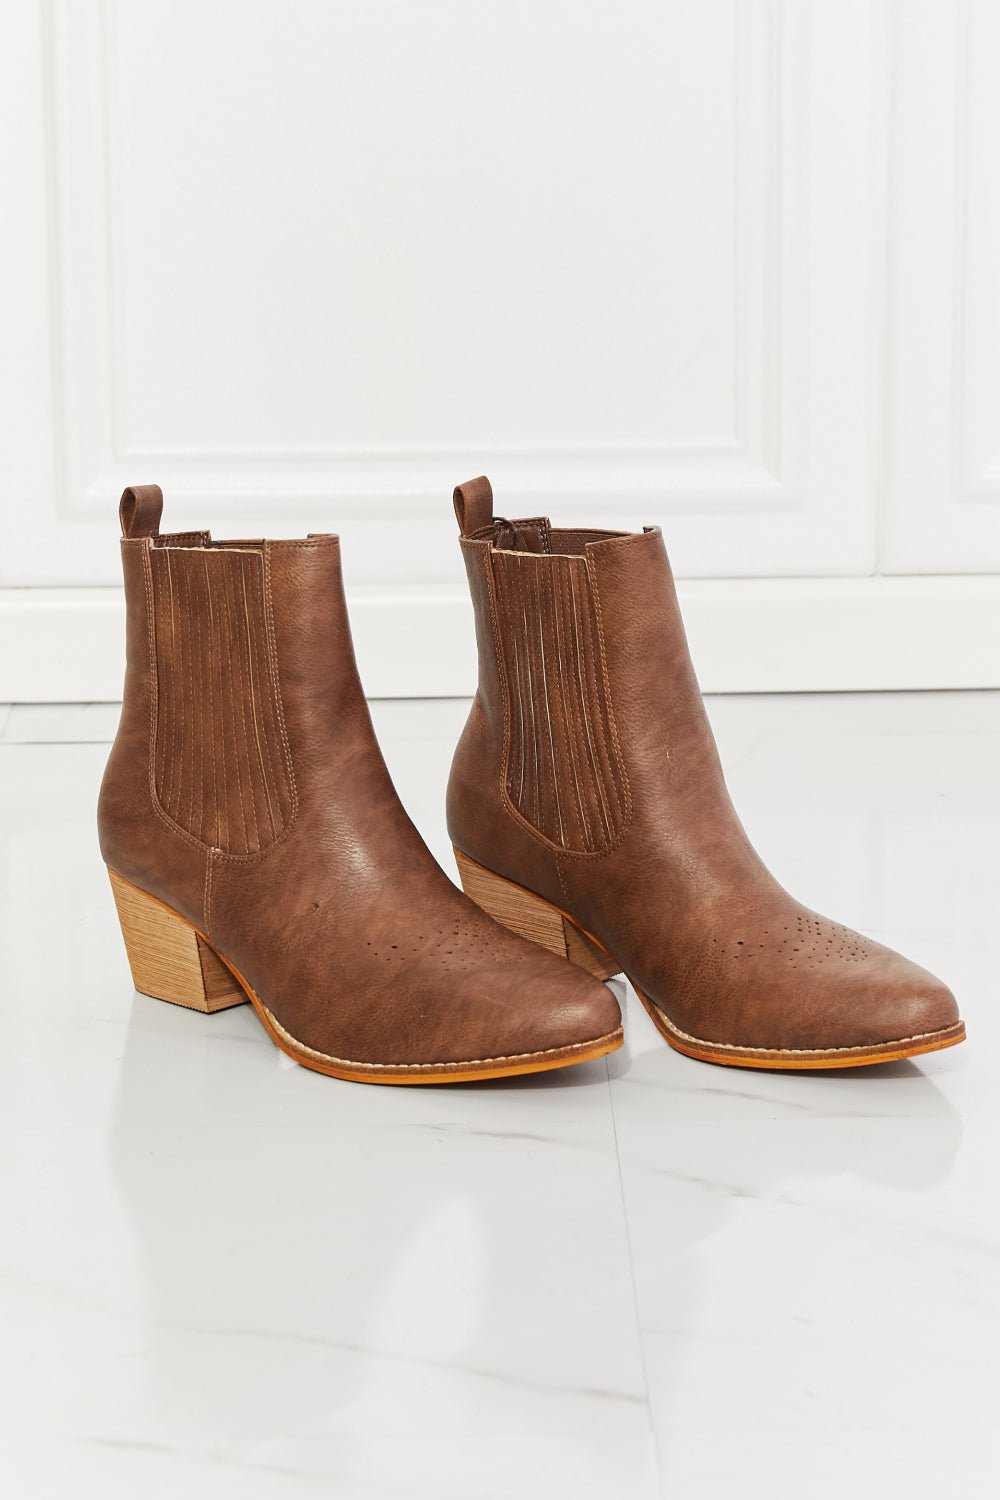 Vegan Leather Stacked Heel Chelsea Boot in ChestnutBootiesMelody